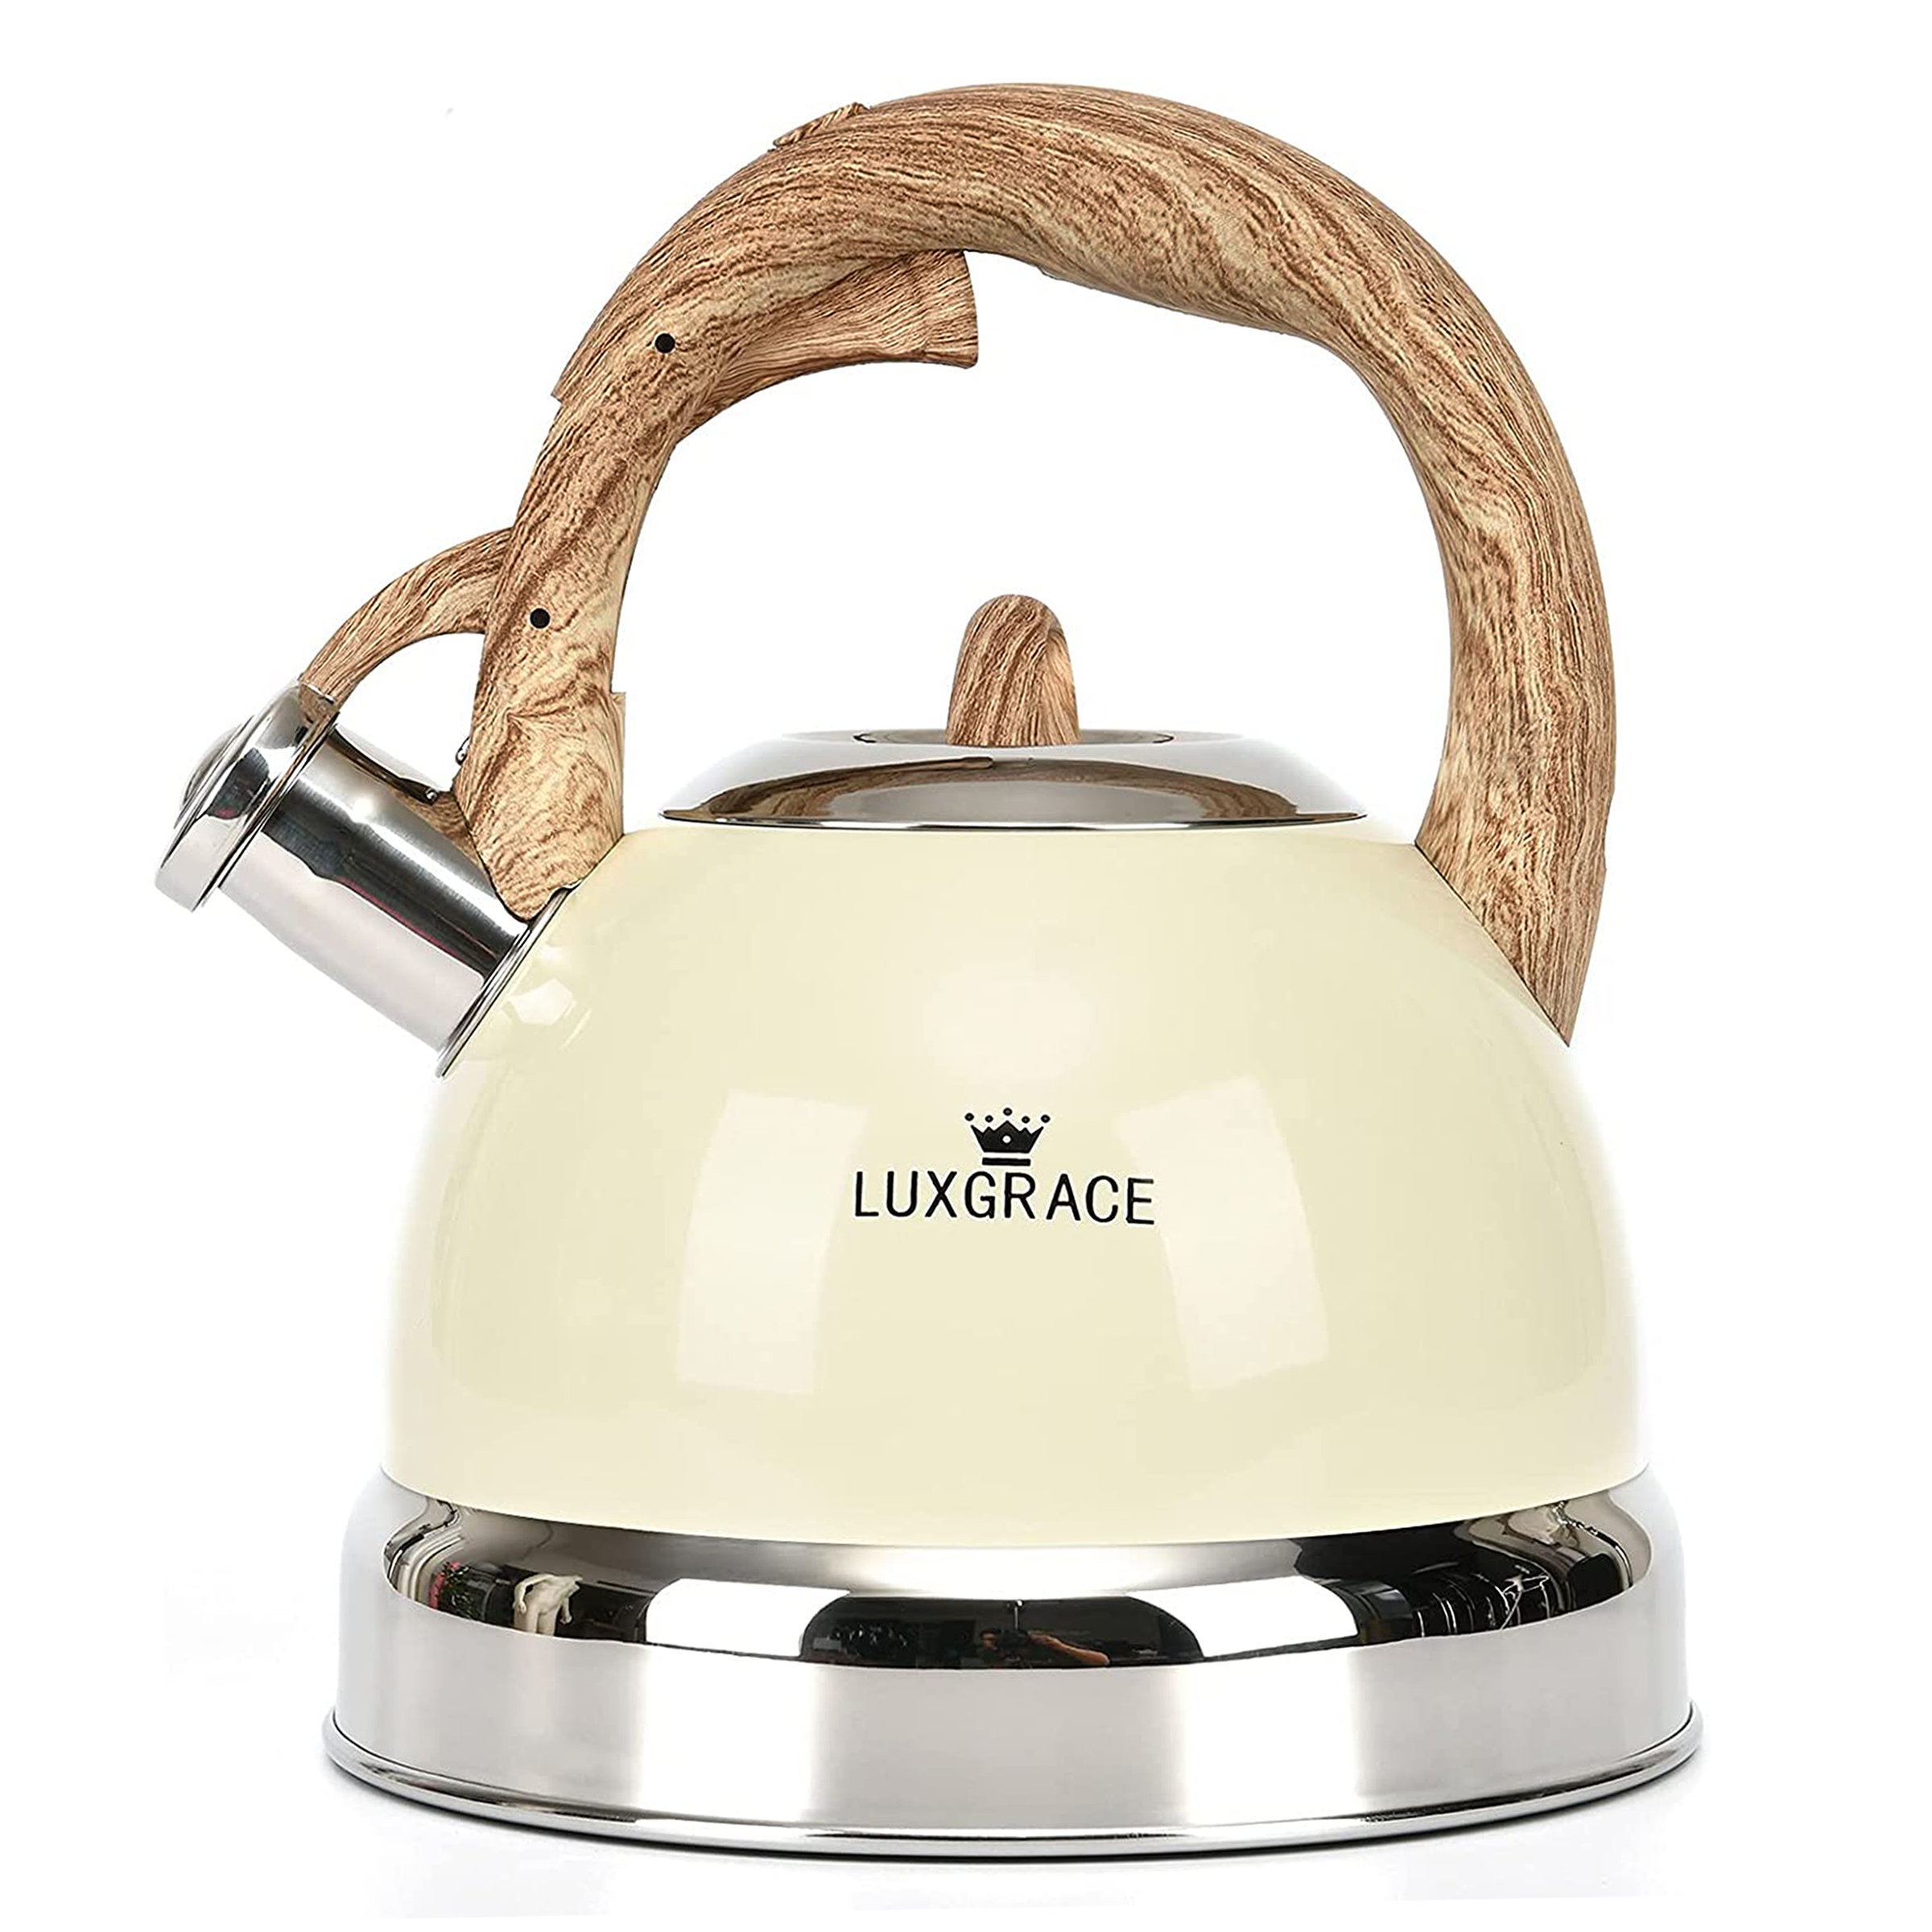 Whistling Stovetop Tea Kettle, Durable Lightweight Water Kettle